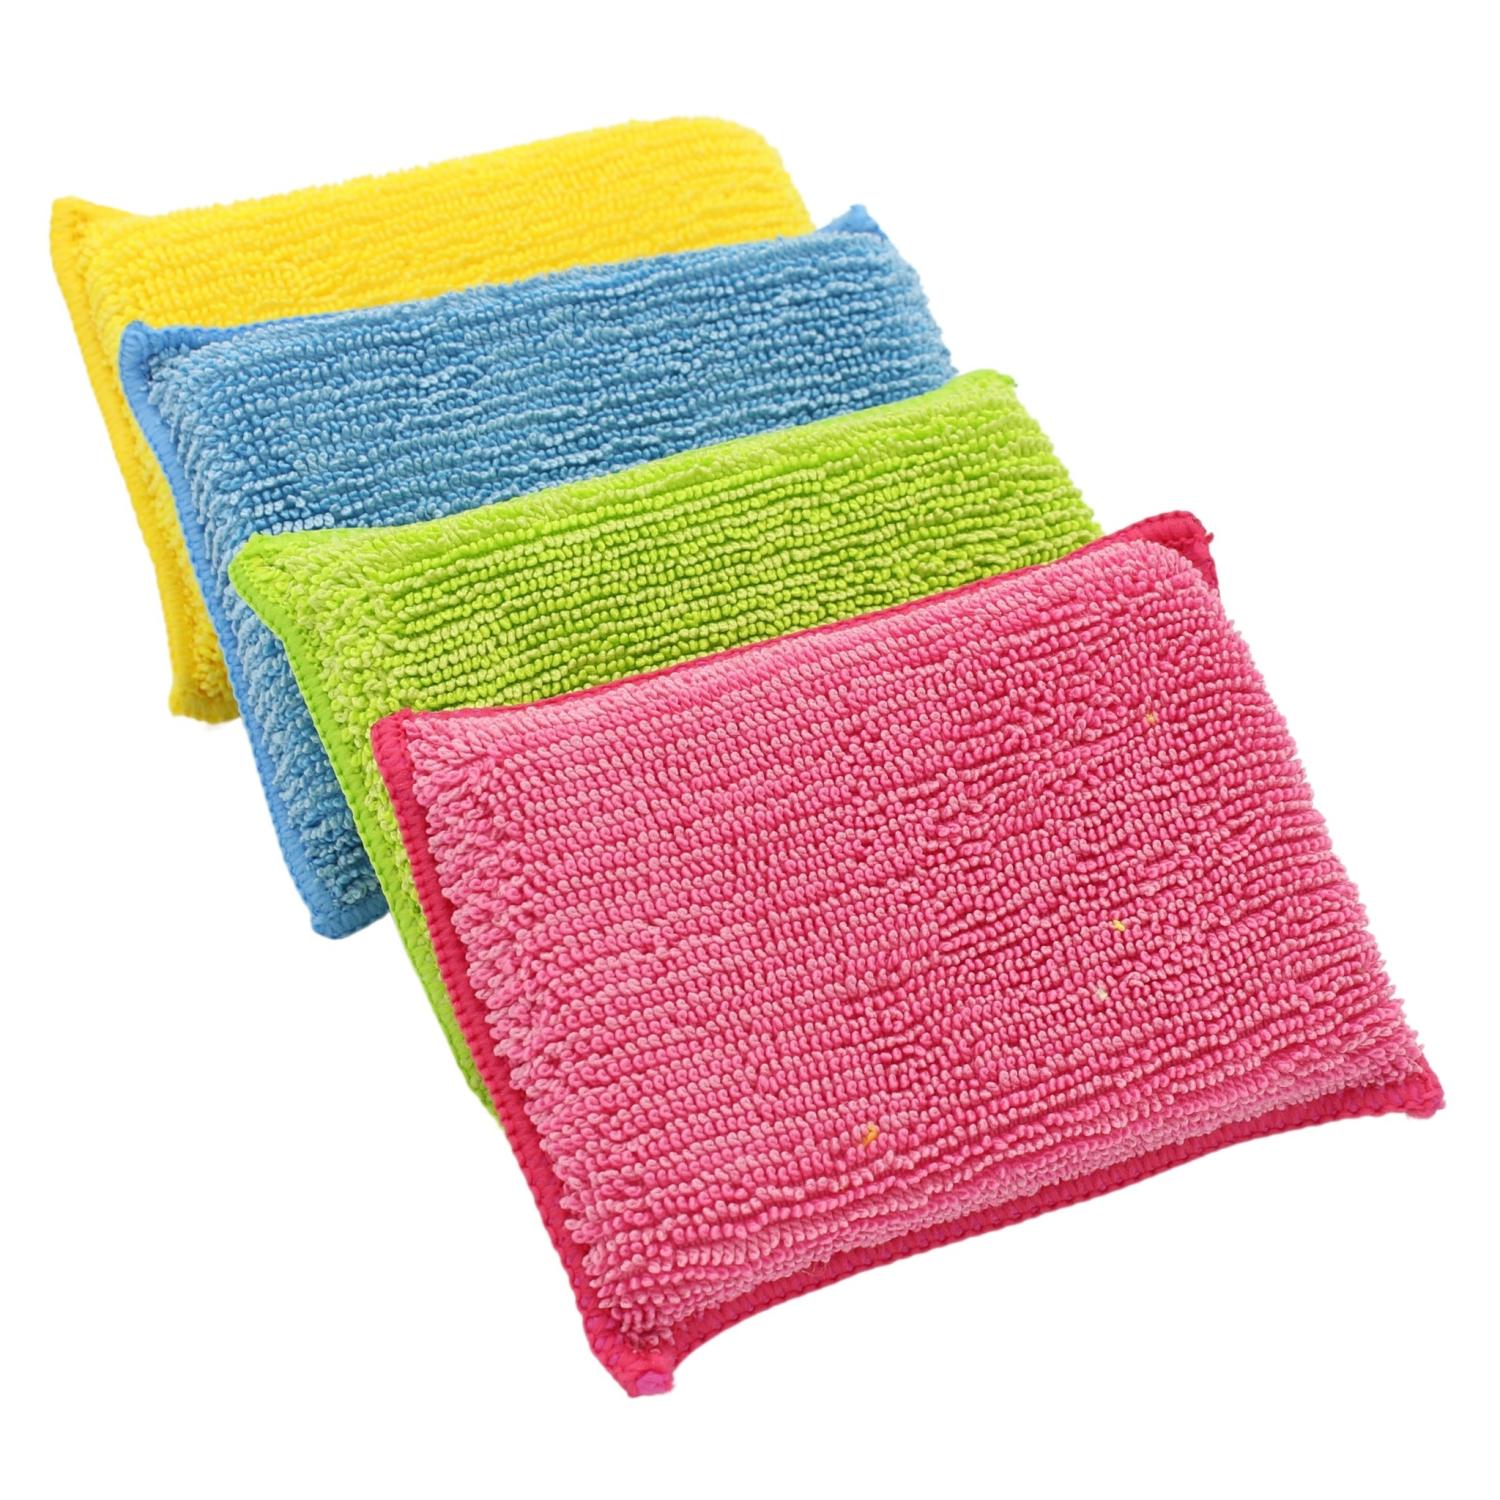 https://www.lavauto-ouest-distribution.fr/images/Image/ePONGE-MICROFIBRE-DUO-Eponge-microfibre-duo-LD.jpg